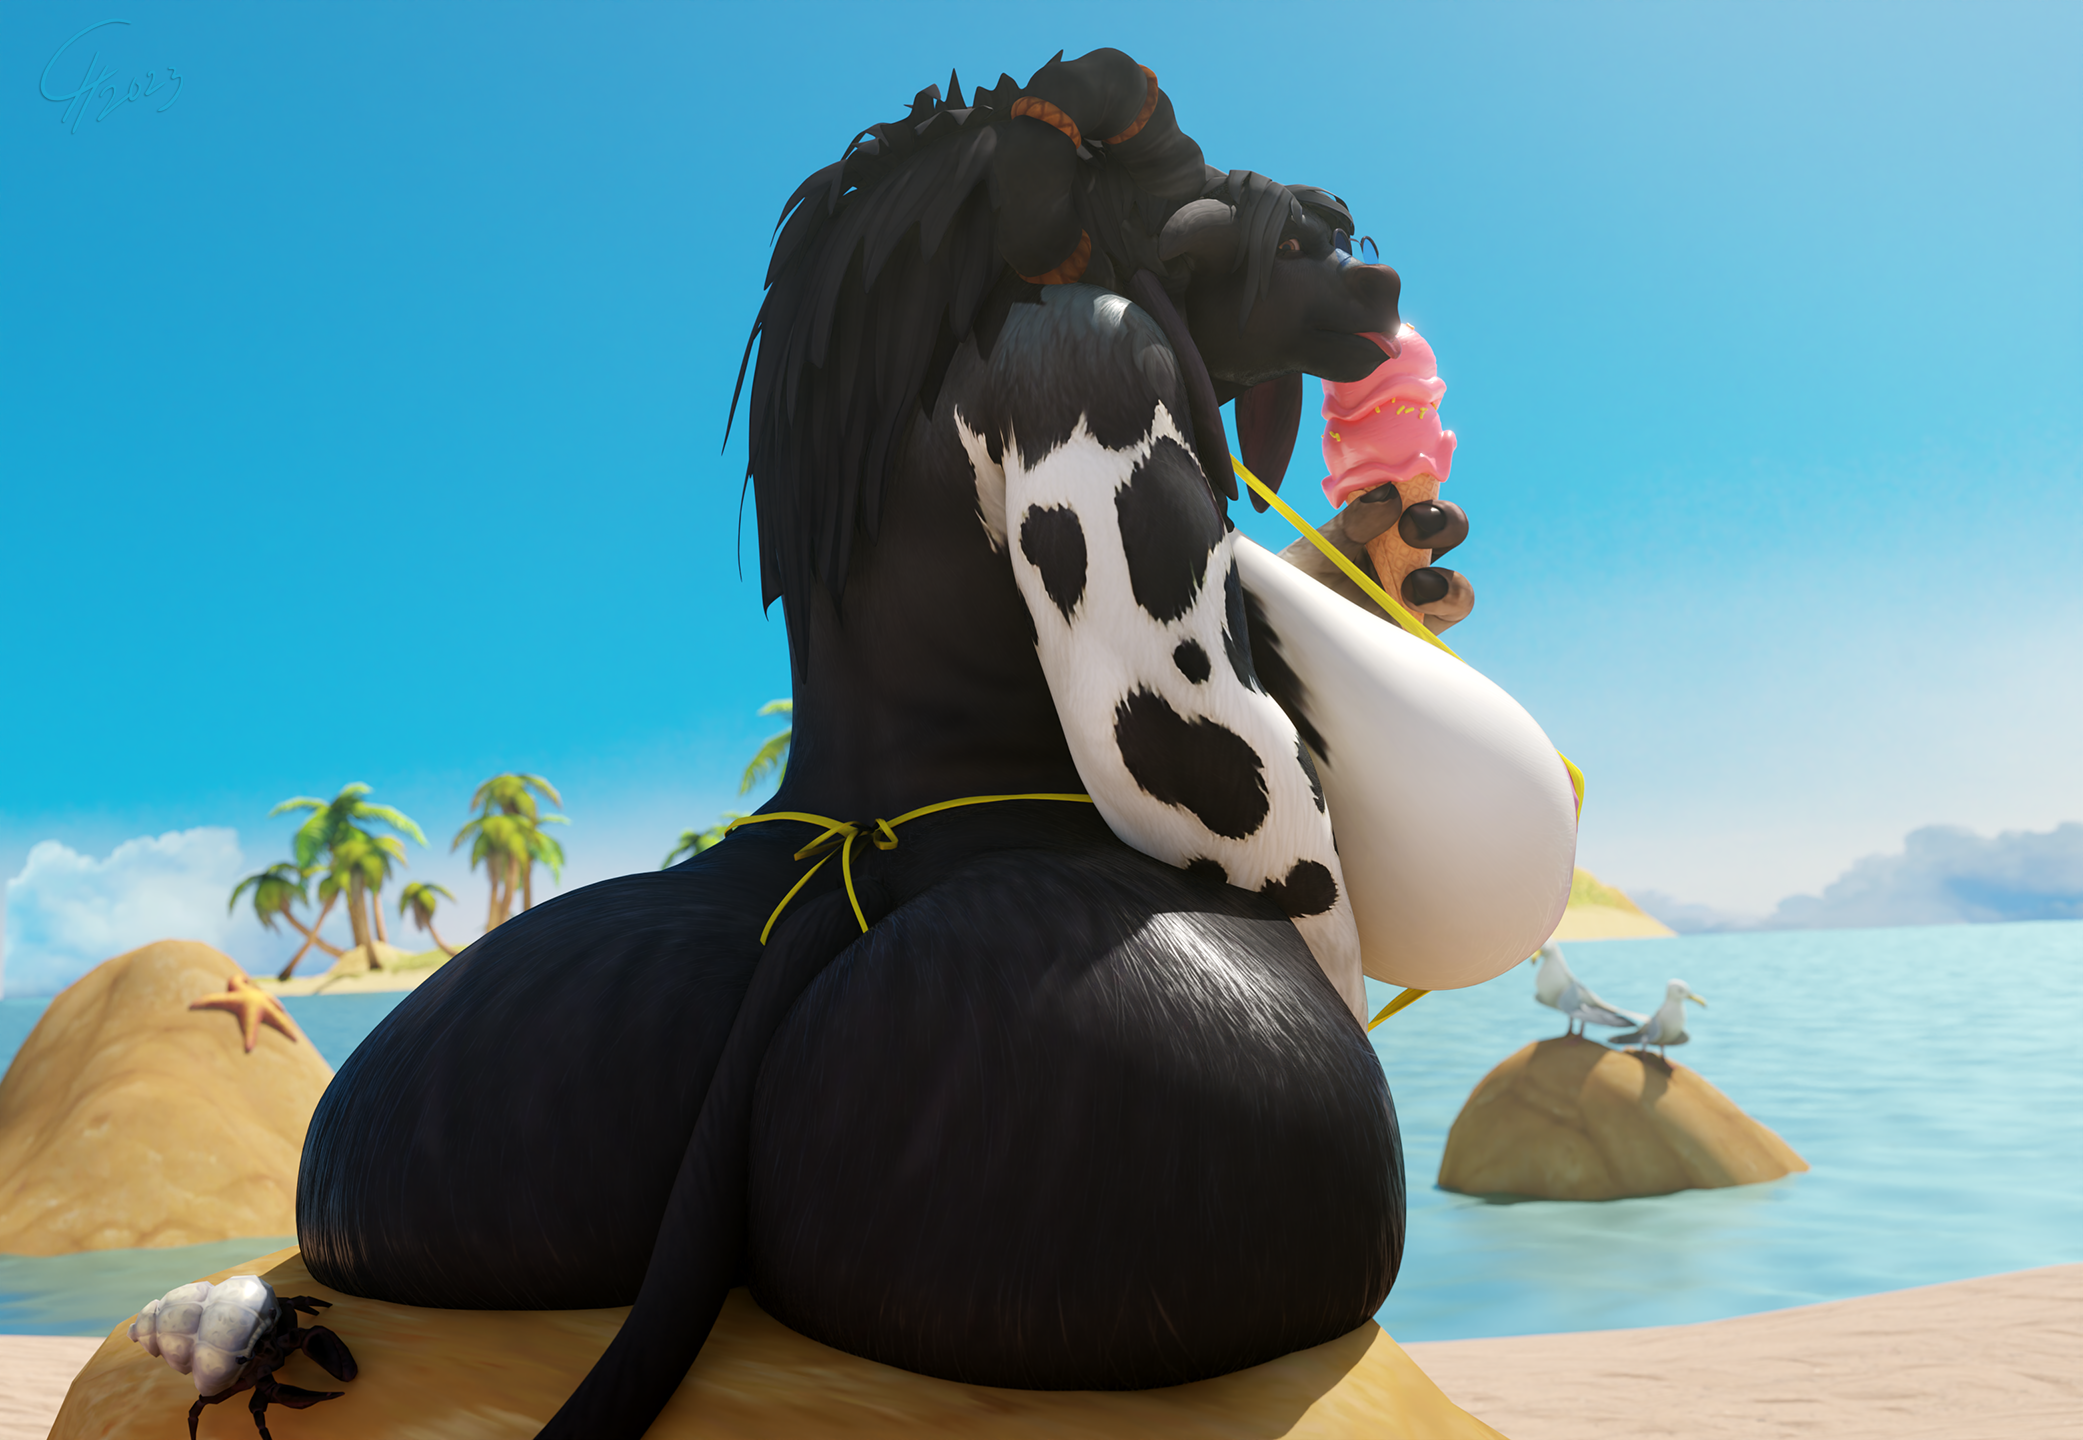 Ice Cream and the Tauren [Tauren/BBW/Tease]
She finally thought she's all alone
and can at last enjoy her ice cream,
[b]you[/b] come sneaking behind and
disturbing her private time. How rude!
[b][url=http://bakaras.com/murlocish/albums/userpics/10001/15/NahimanaBeach22023XL.png]===XL-Size Edit===[/url][/b]
Keywords: OC;Tauren;BBW;Tease;Pinup